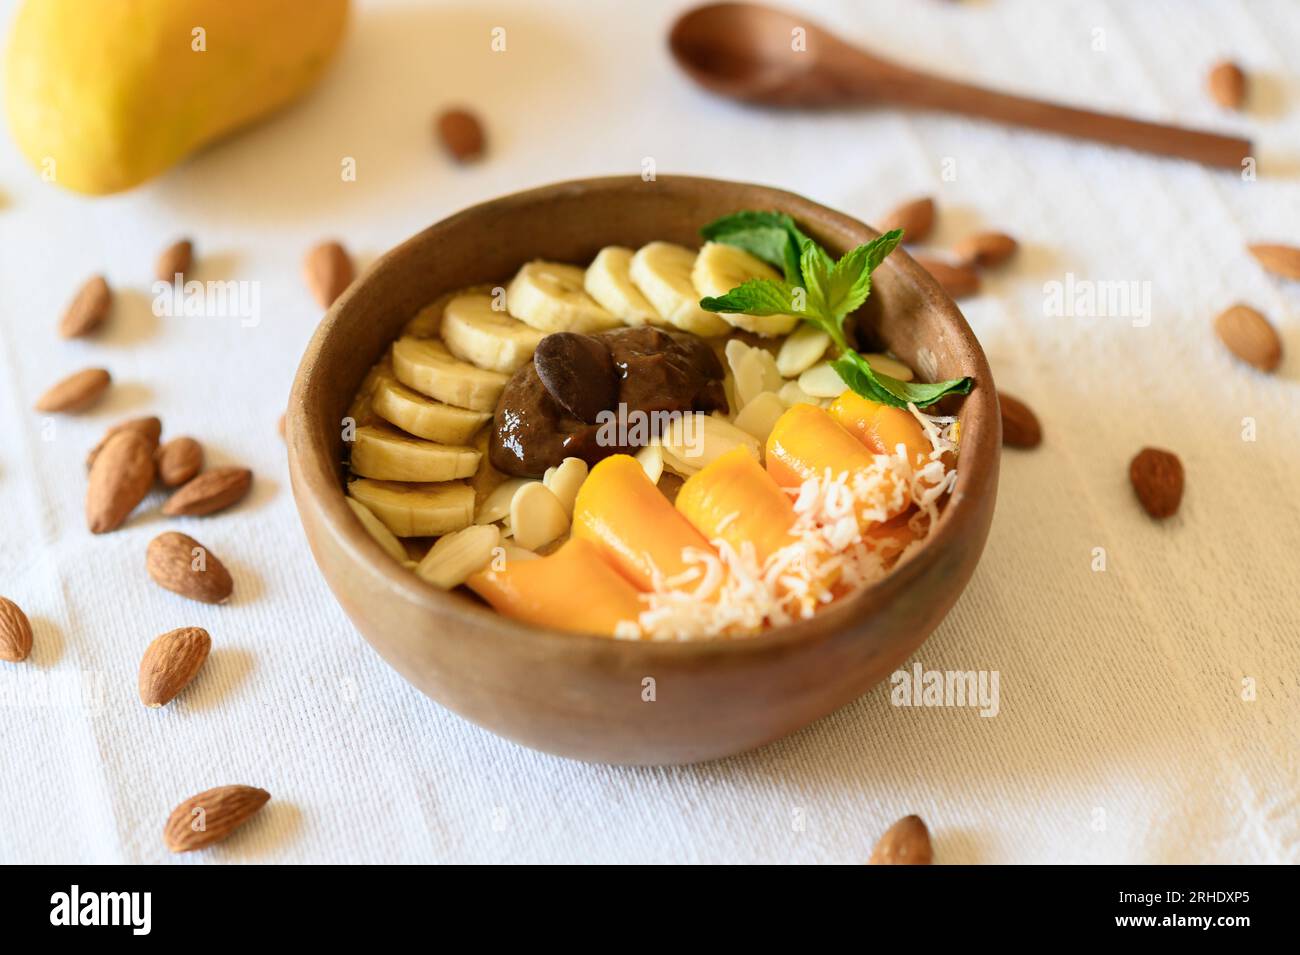 High angle of wooden bowl filled with fresh banana and mango slices almonds and melted chocolate Stock Photo